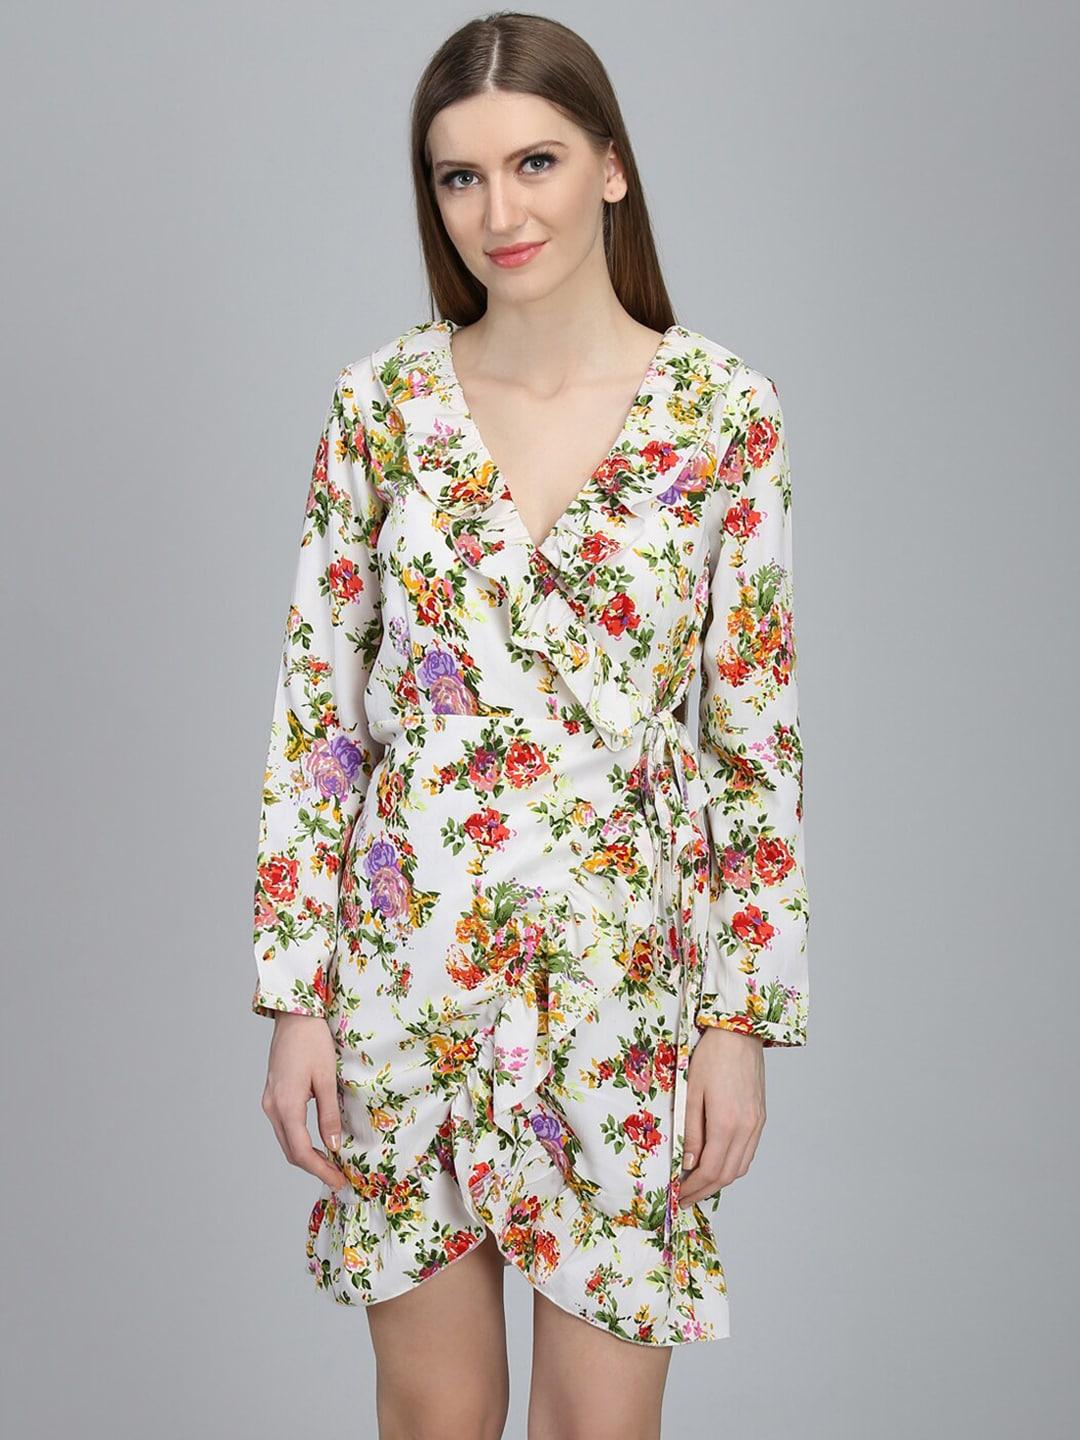 dodo-&-moa-off-white-&-red-floral-crepe-wrap-ruffled-dress